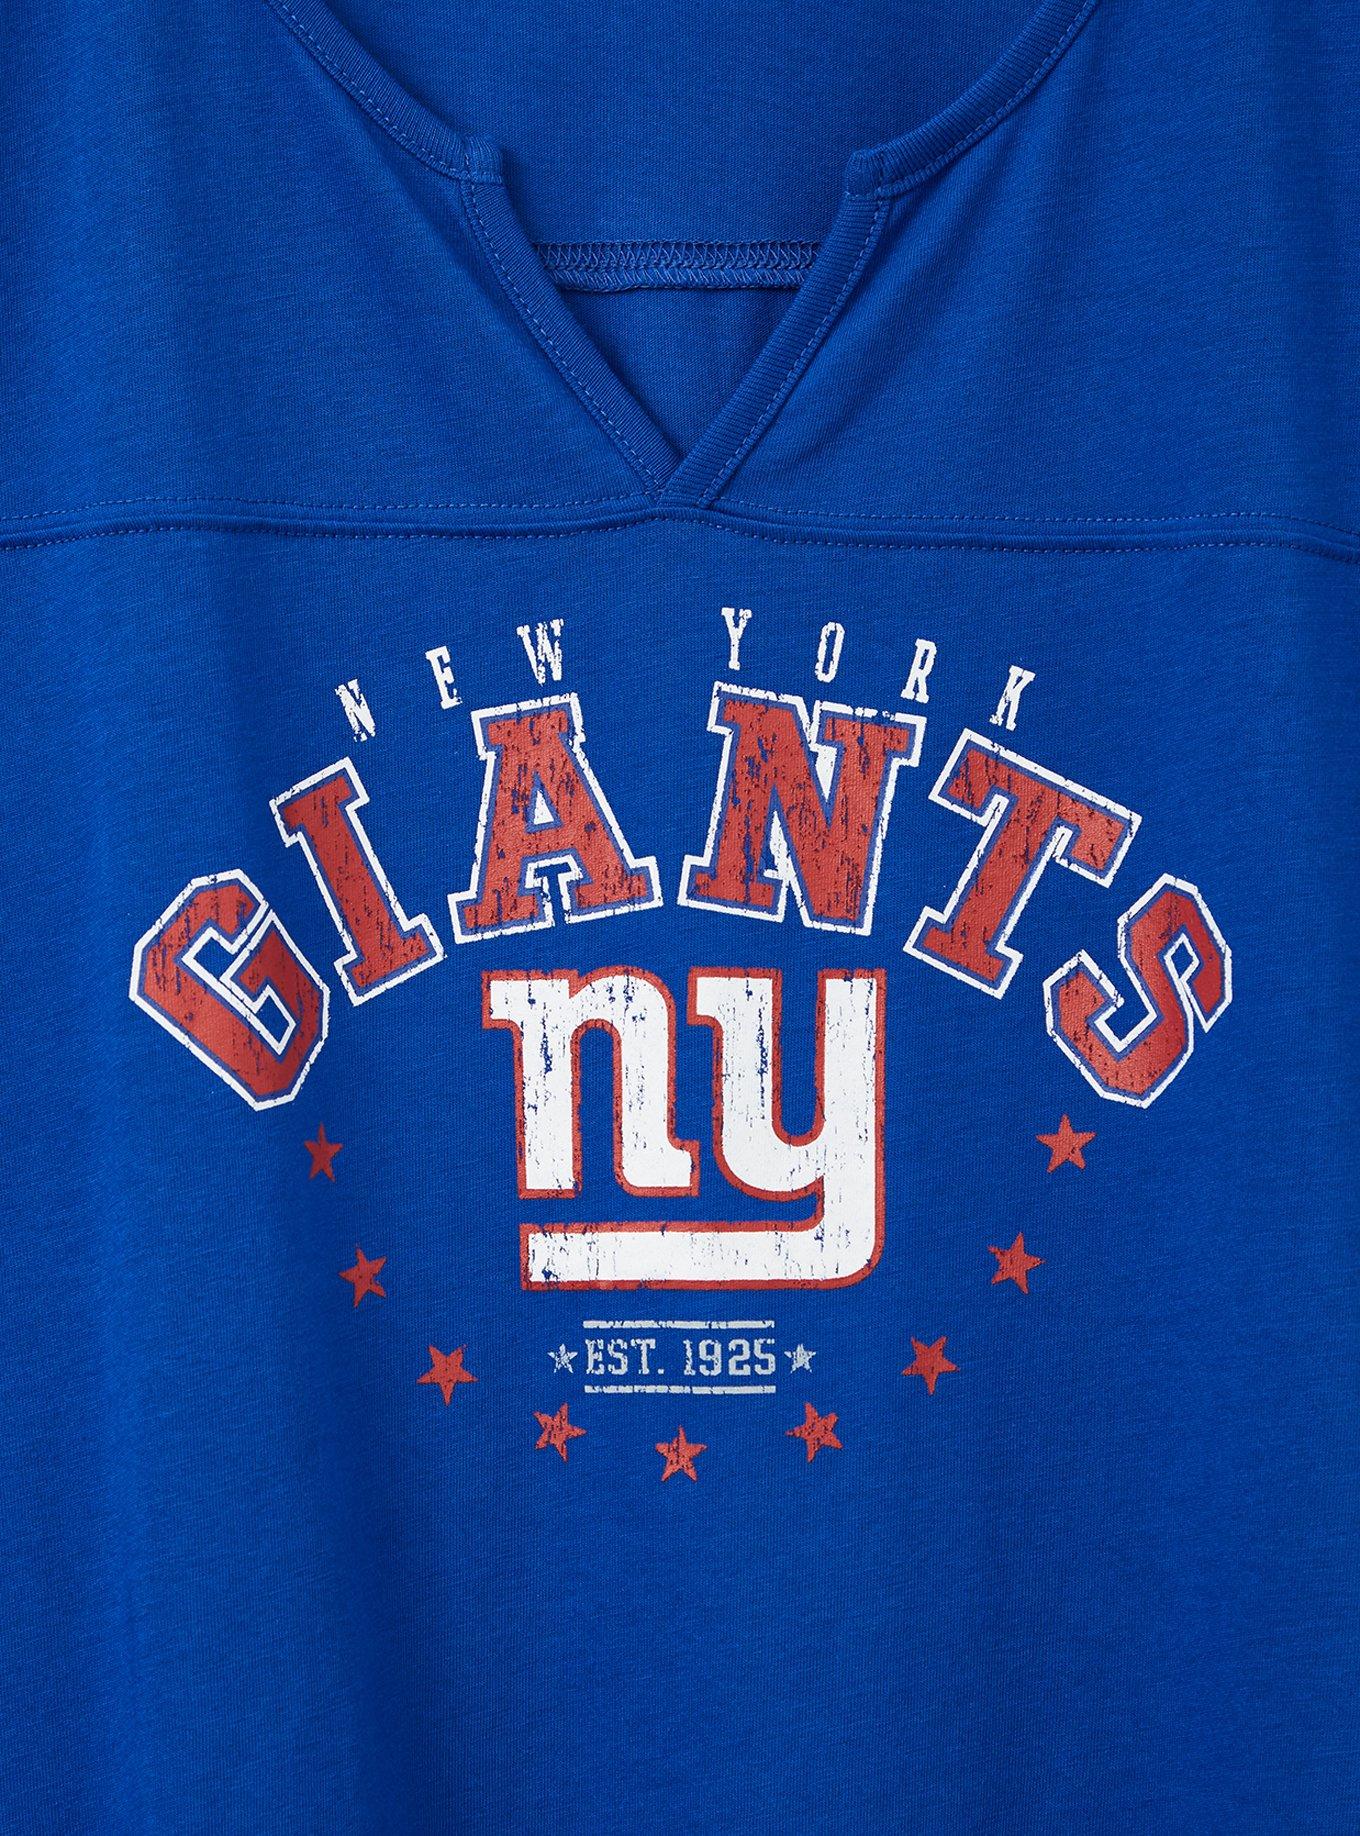 Classic Giants jersey